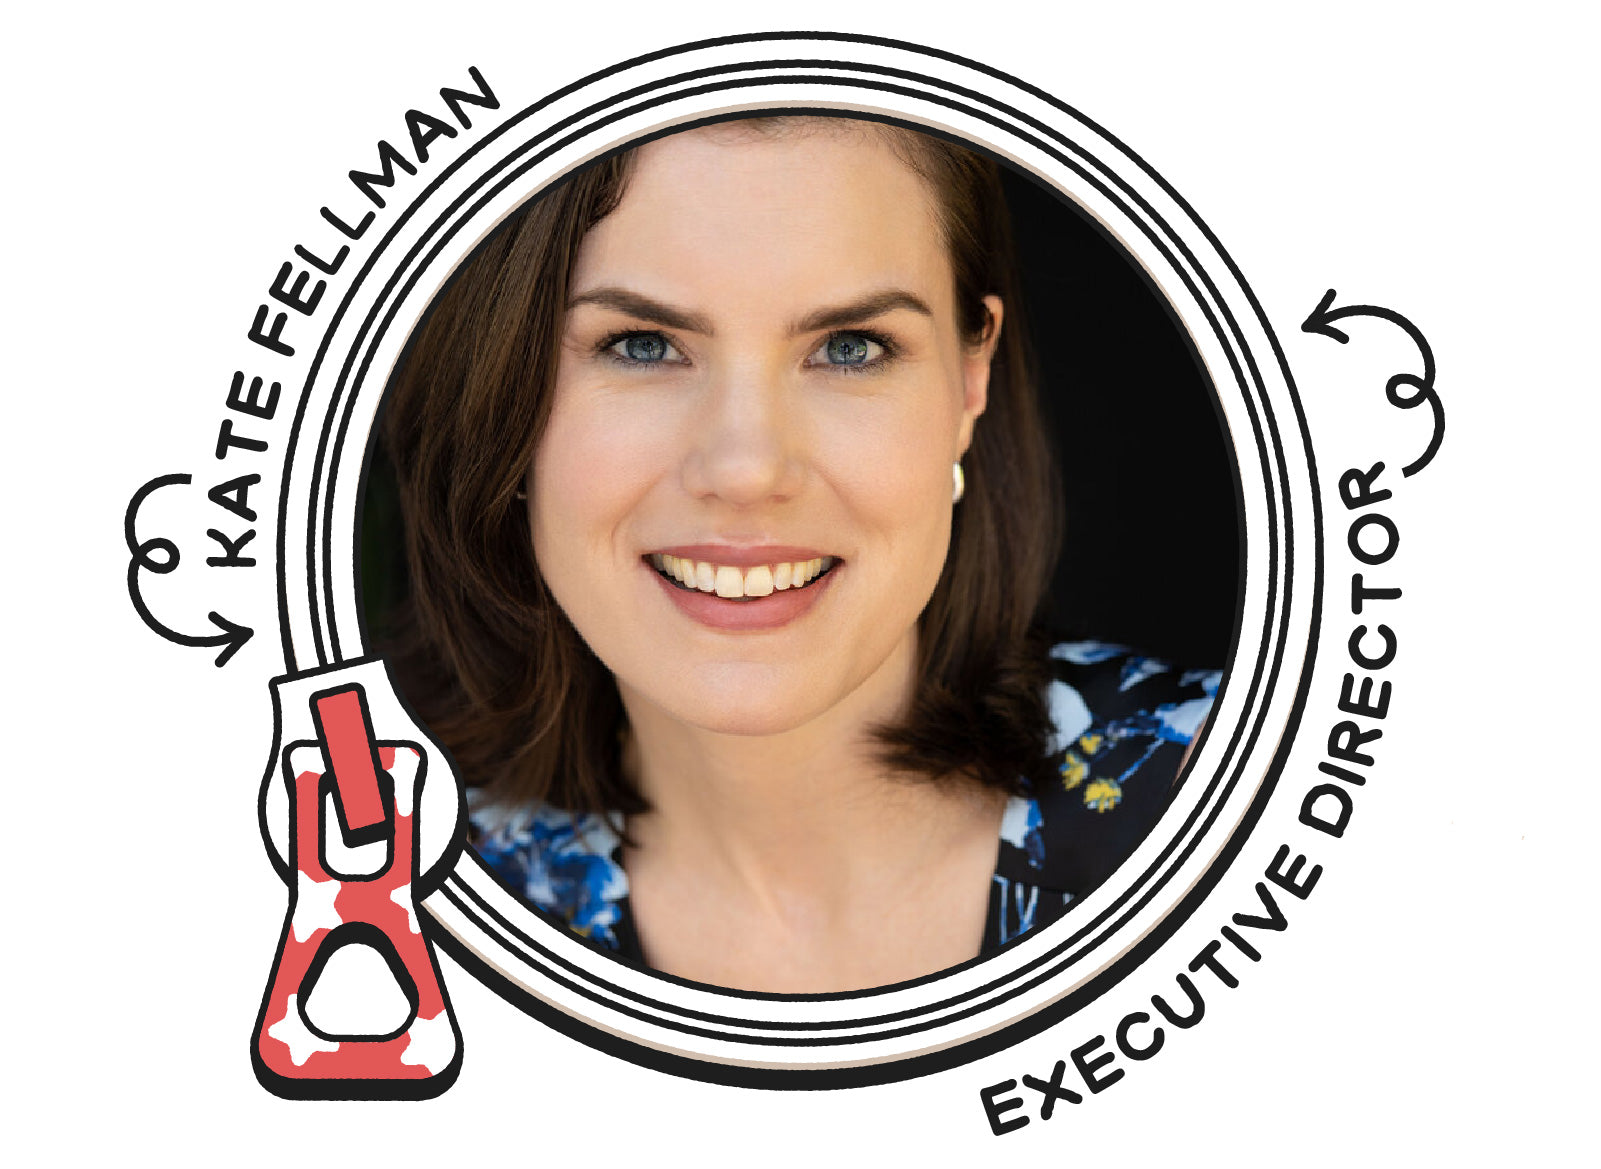 Headshot in a circular frame of Kate Fellman, Executive Director of You Can Vote